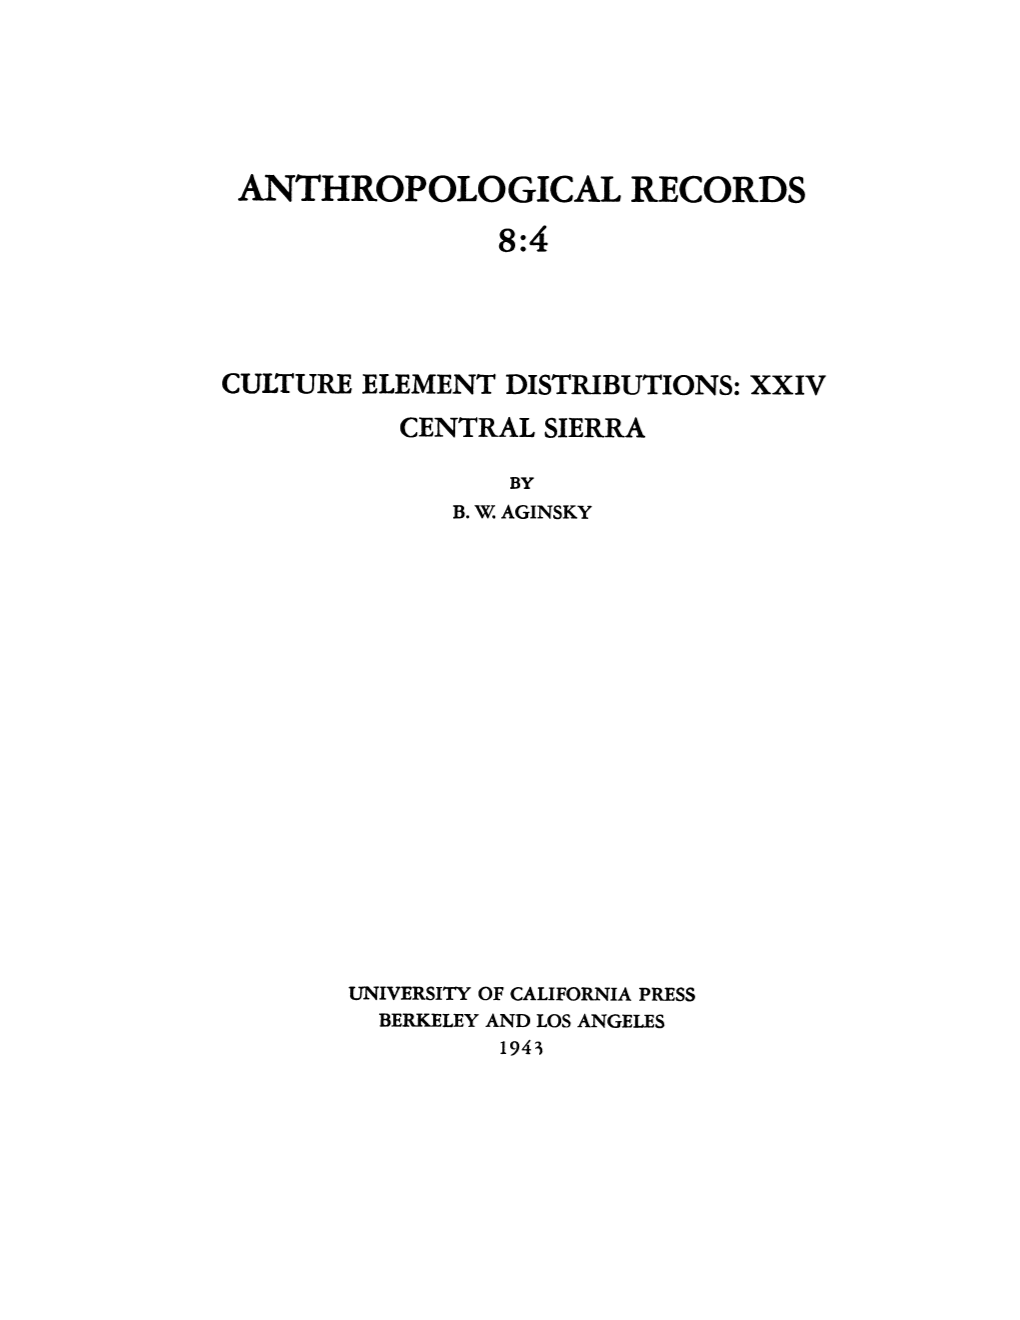 Anthropological Records 8:4